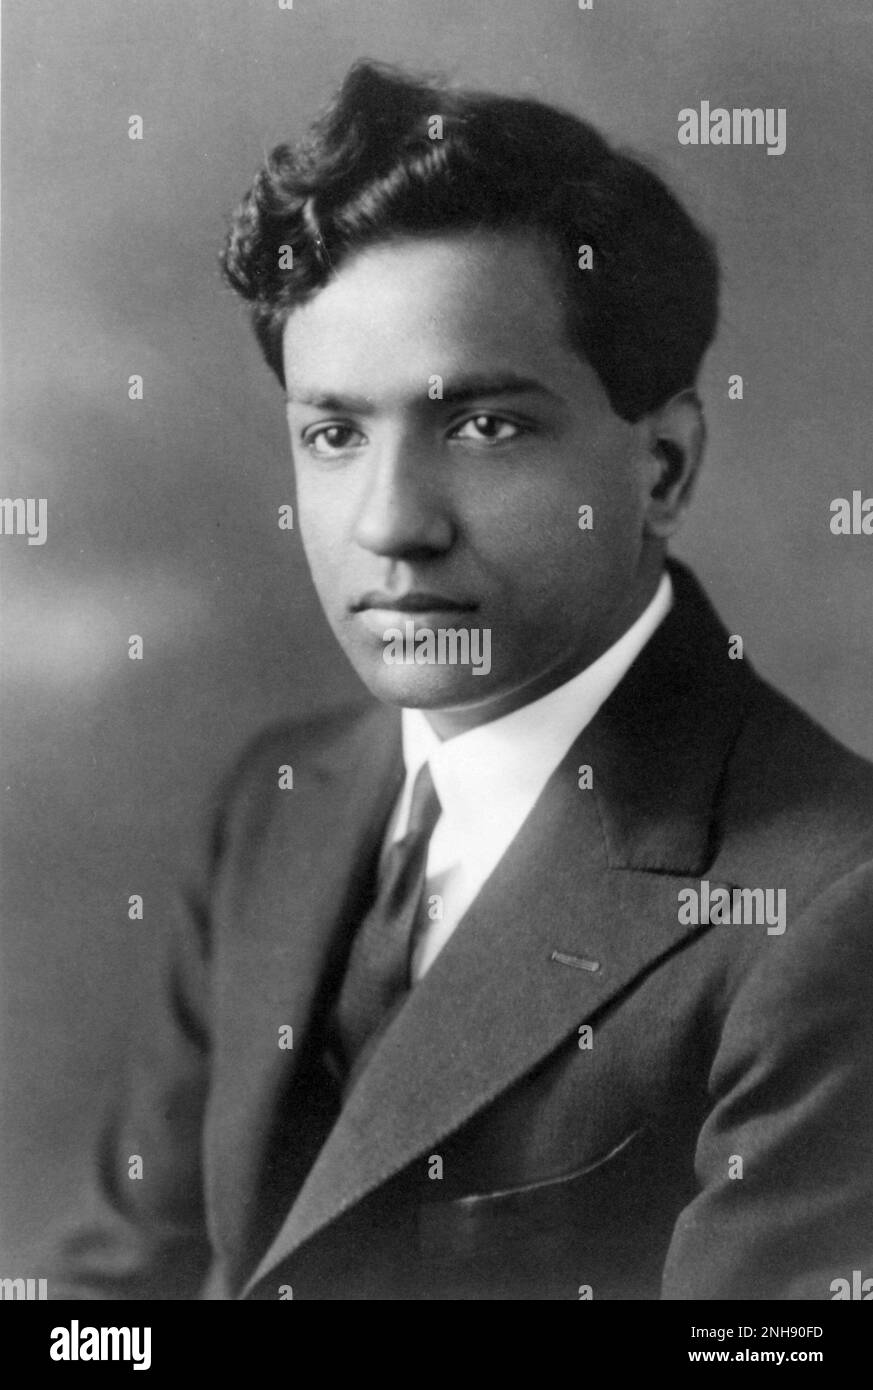 Portrait of a young Subrahmanyan Chandrasekhar as Fellow of Trinity College, Cambridge, 1934. Subrahmanyan Chandrasekhar (1910-1995) was an Indian-American astrophysicist who spent his professional life in the United States. He shared the 1983 Nobel Prize for Physics with William A. Fowler. Stock Photo